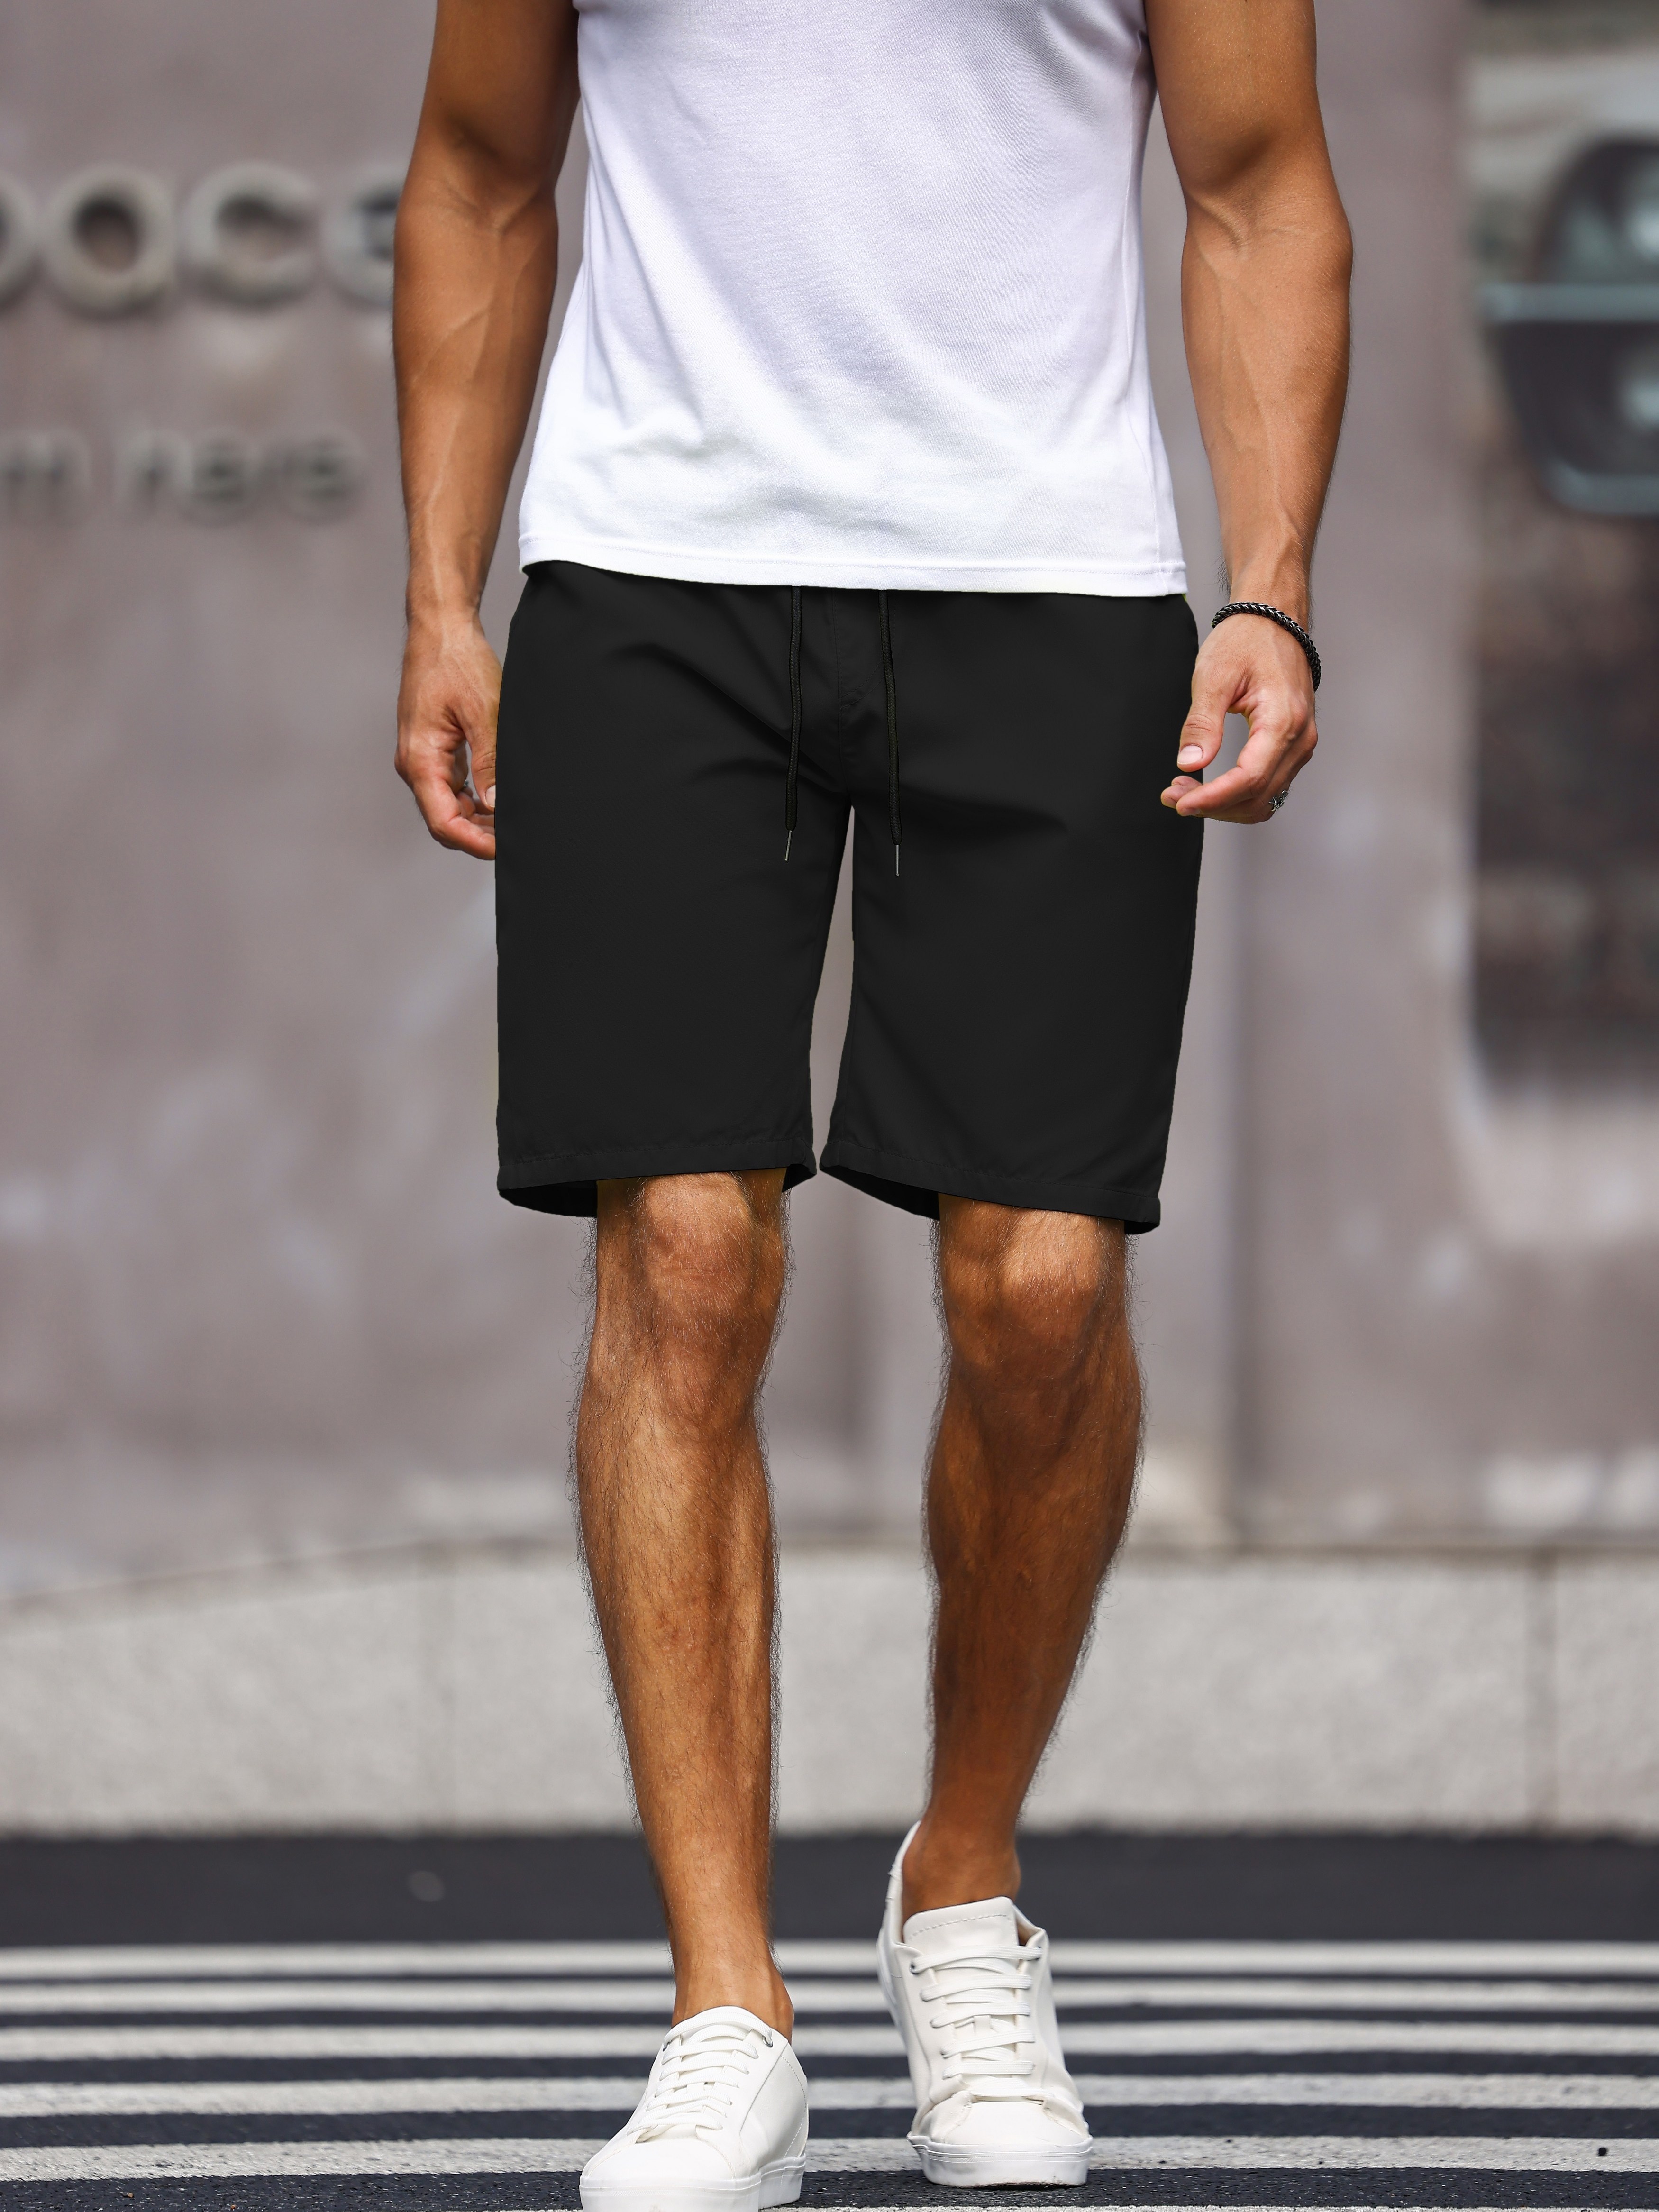 Trendsetting plain black sport shorts For Leisure And Fashion 